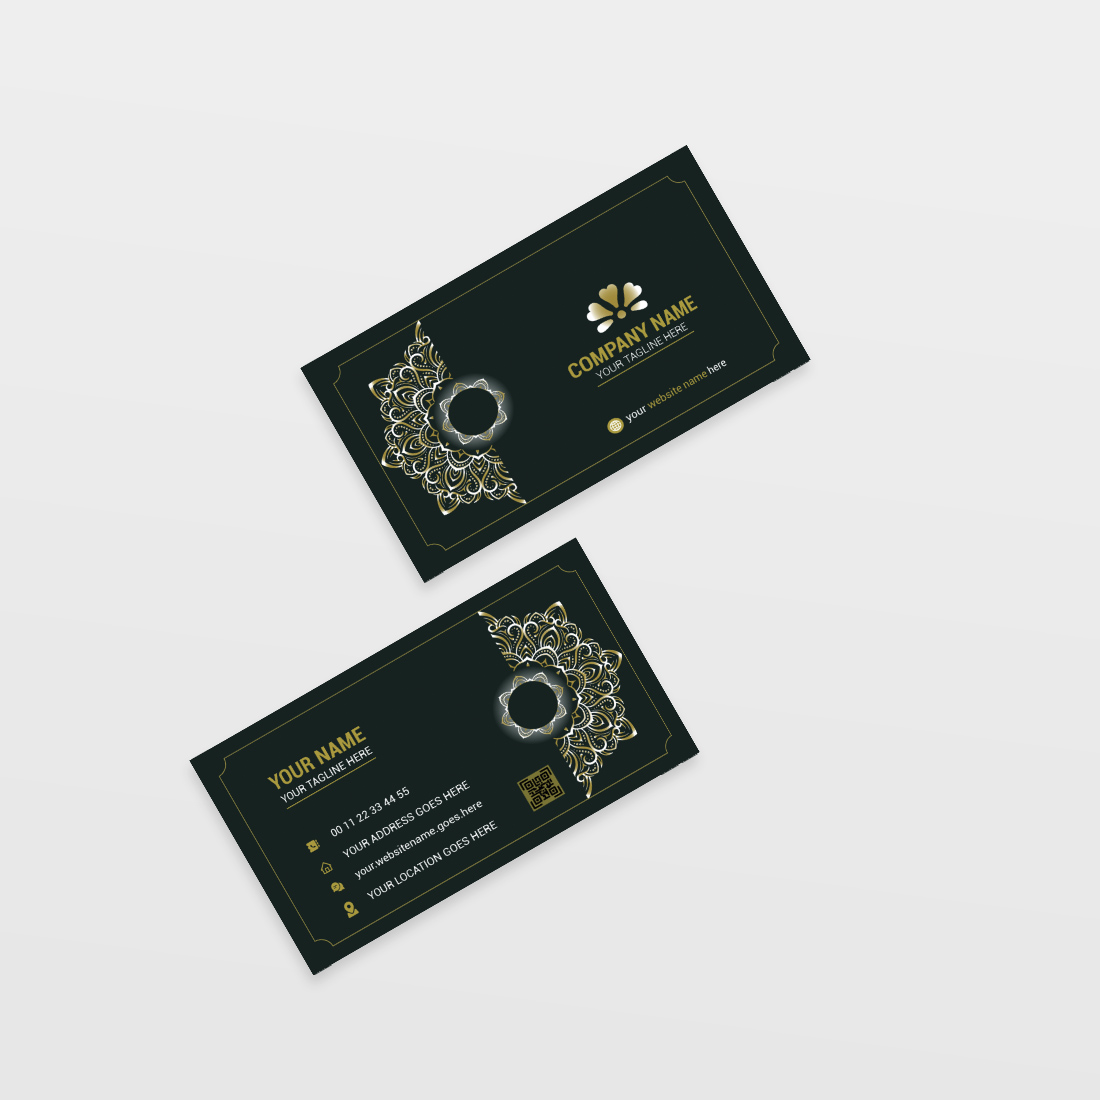 Two black and gold business cards on a white surface.